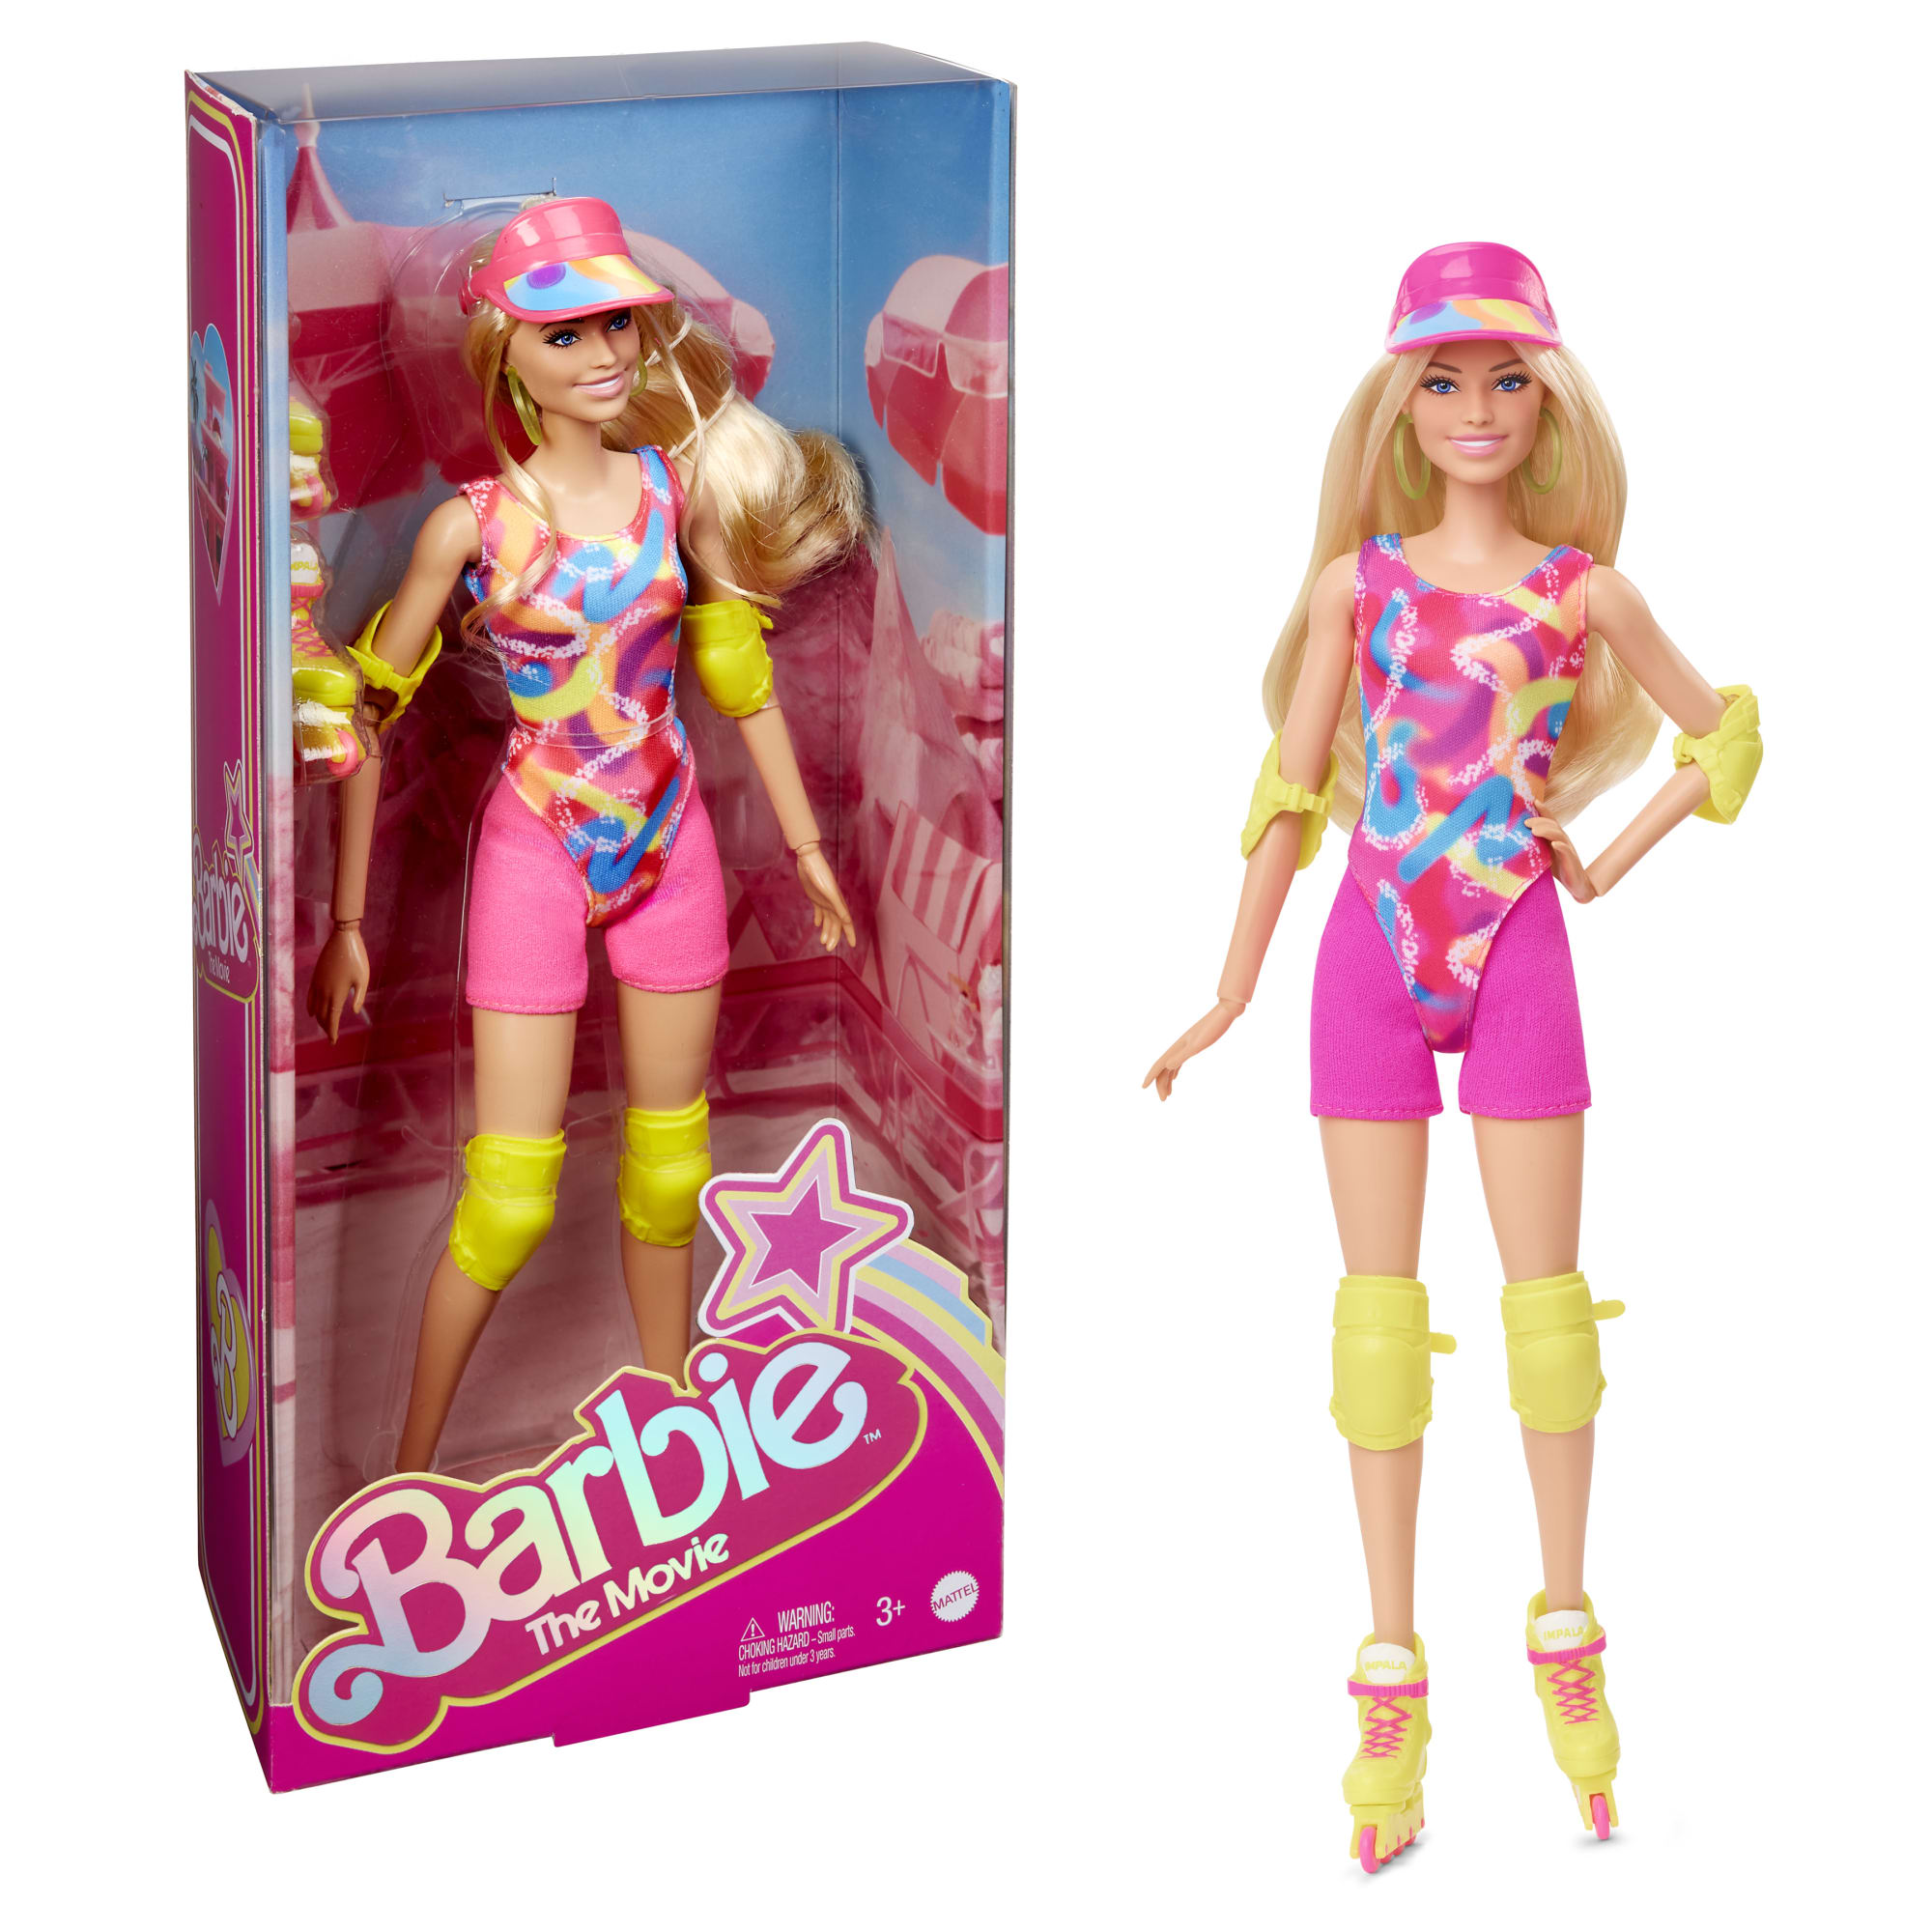 Barbie the Movie Collectible Doll, Margot Robbie As Barbie In Inline Skating Outfit (Exclusive)